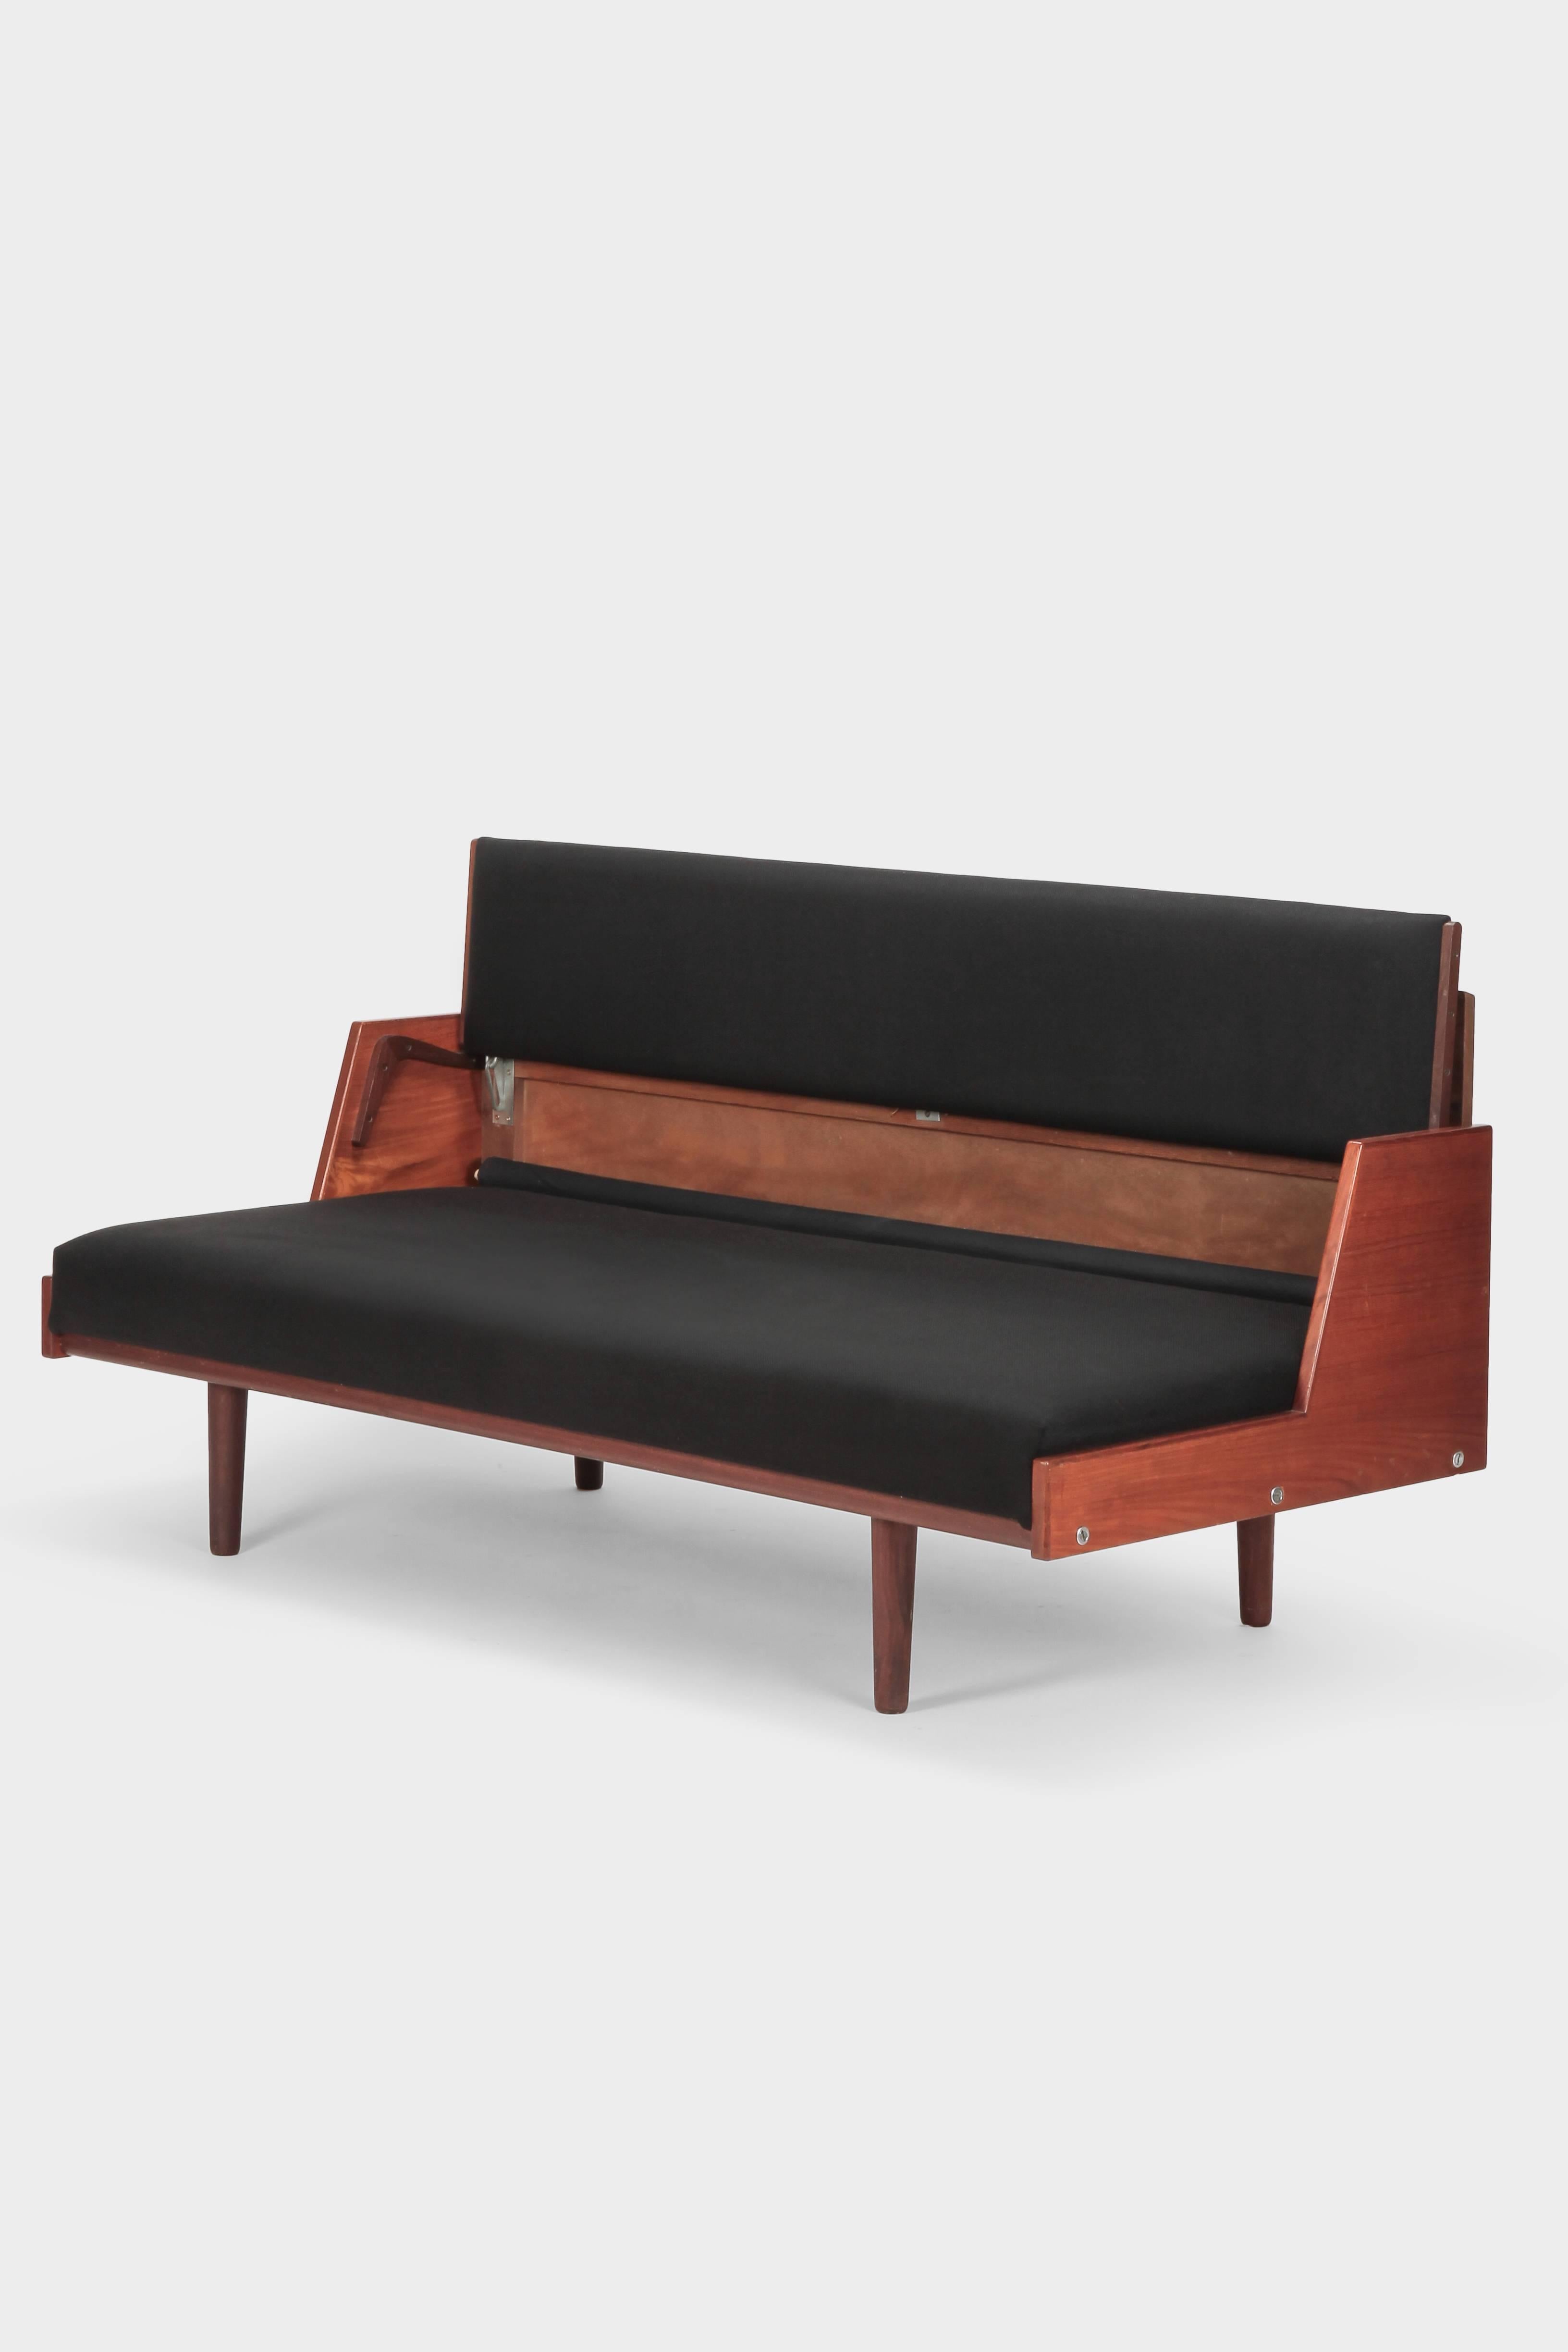 Hans Wegner daybed, model GE-258 manufactured by GETAMA in Denmark in the 1950s. This piece serves as a sofa or converts in to a guest bed. The backrest can simply be moved up and reveals an attached bed sheet to protect the upholstery.